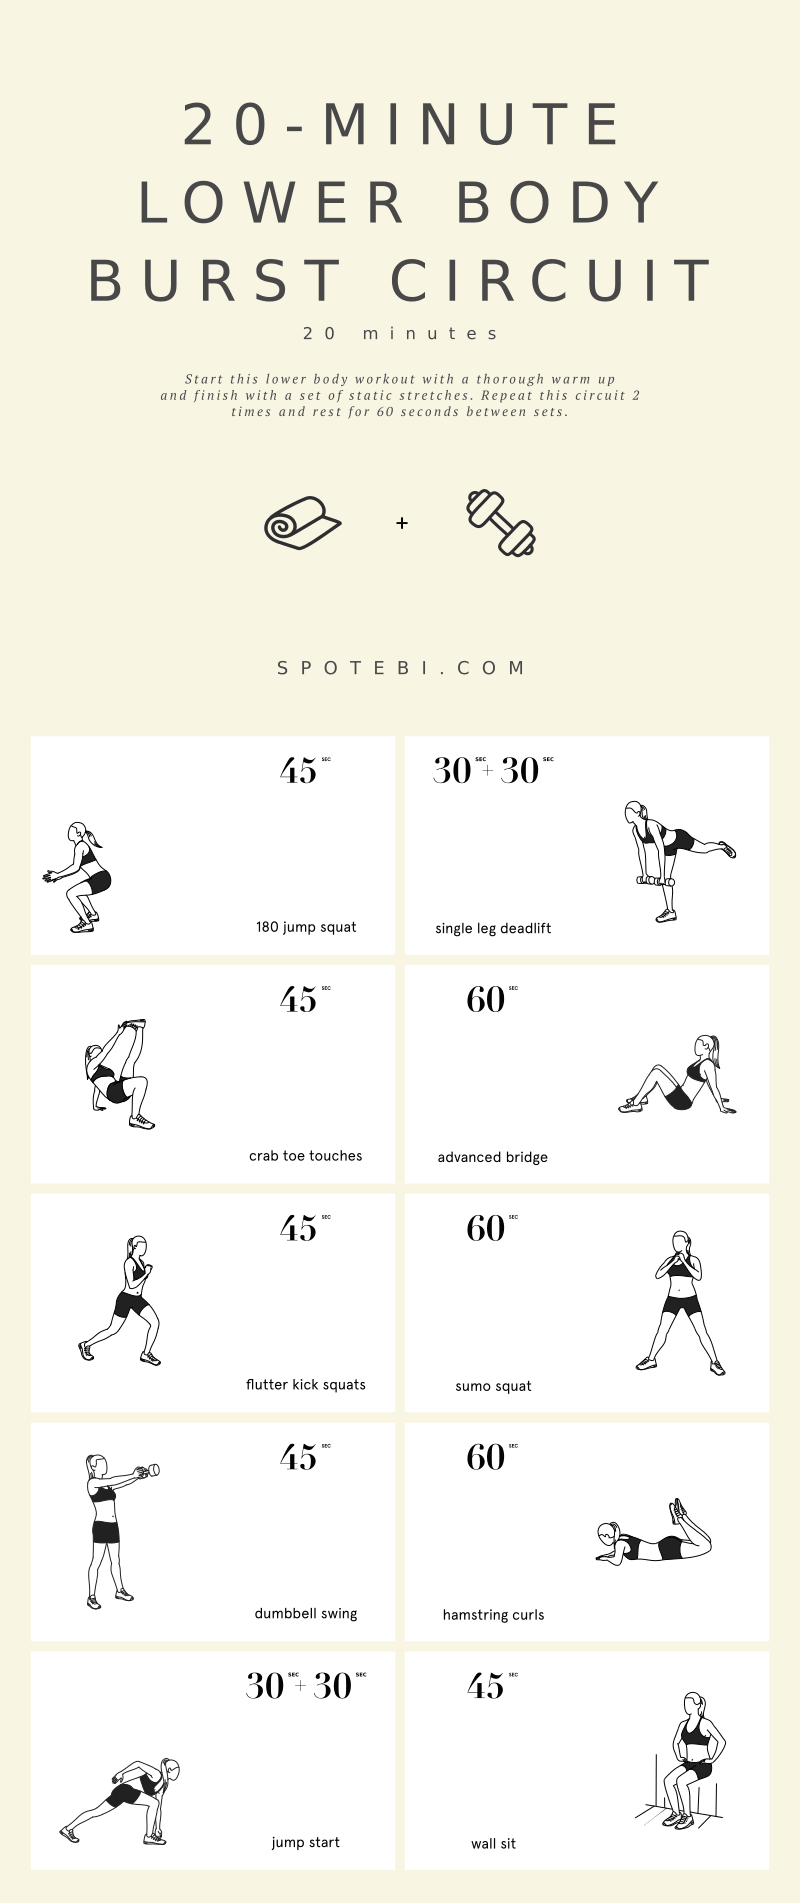 This 20-Minute Lower Body Burst Circuit requires you to exercise close to your maximum heart rate for 45-60 seconds, followed by 45-60 seconds of lower intensity exercising. https://www.spotebi.com/workout-routines/20-minute-lower-body-burst-circuit/